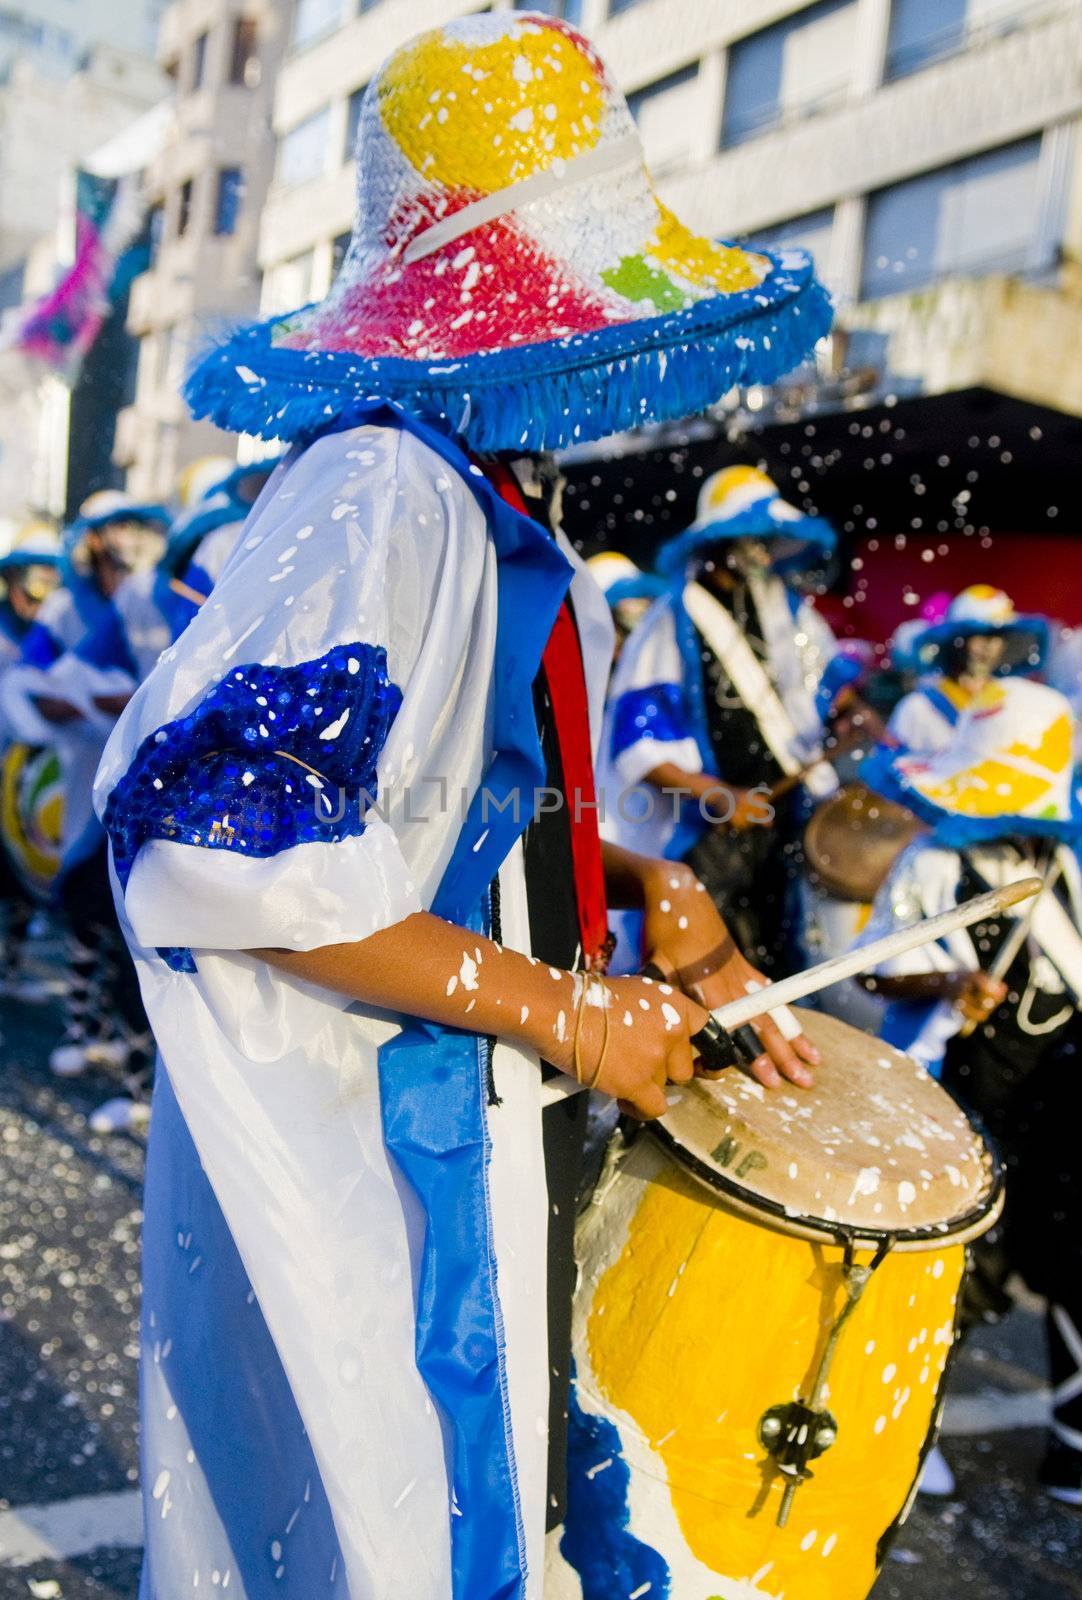 Candombe drummers in Montevideo Uruguay in the time of the carnaval